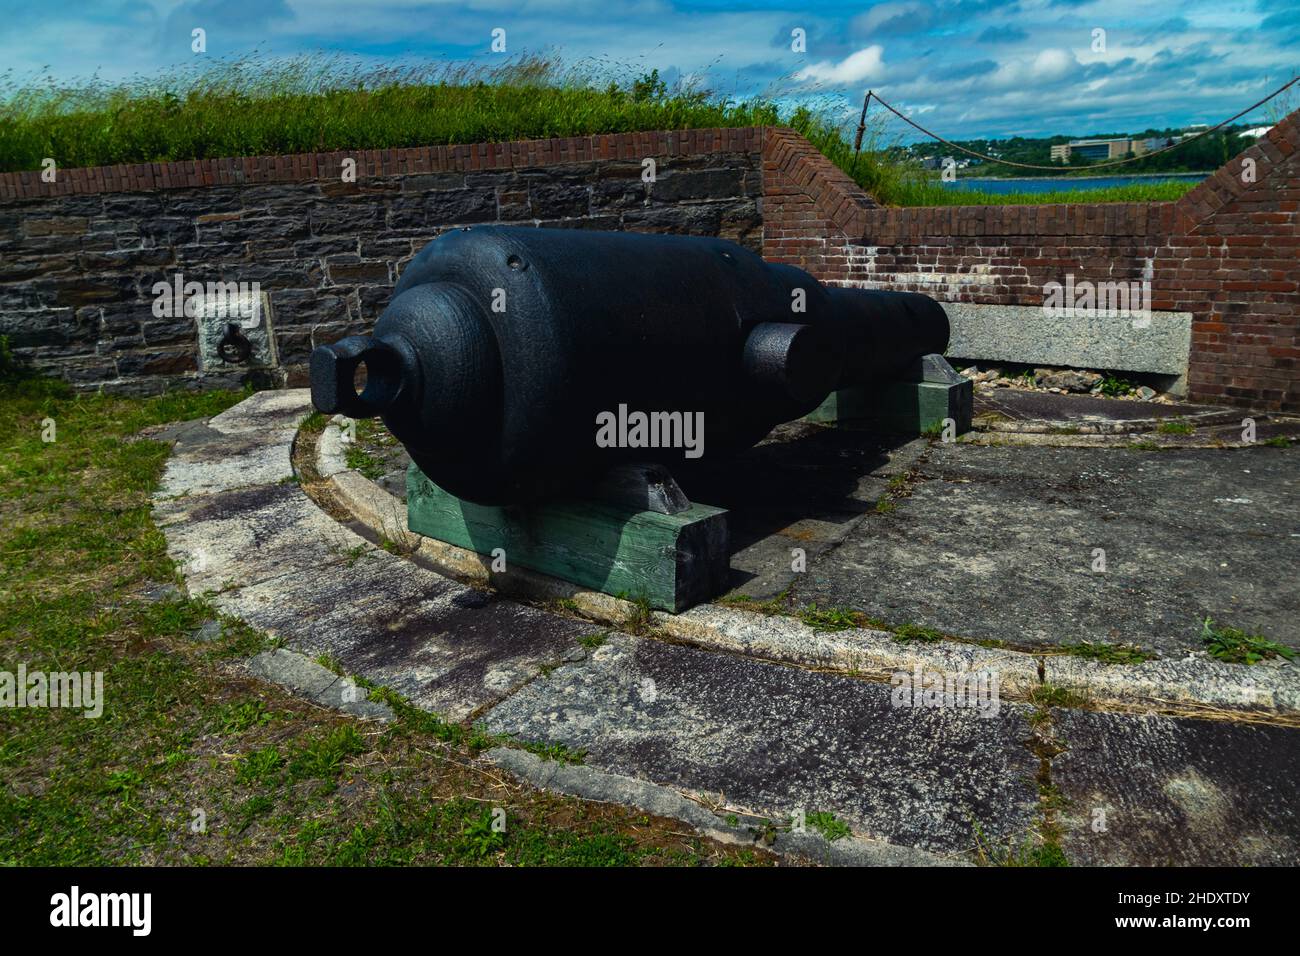 9-inch rml gun in fort charlotte on georges island Stock Photo